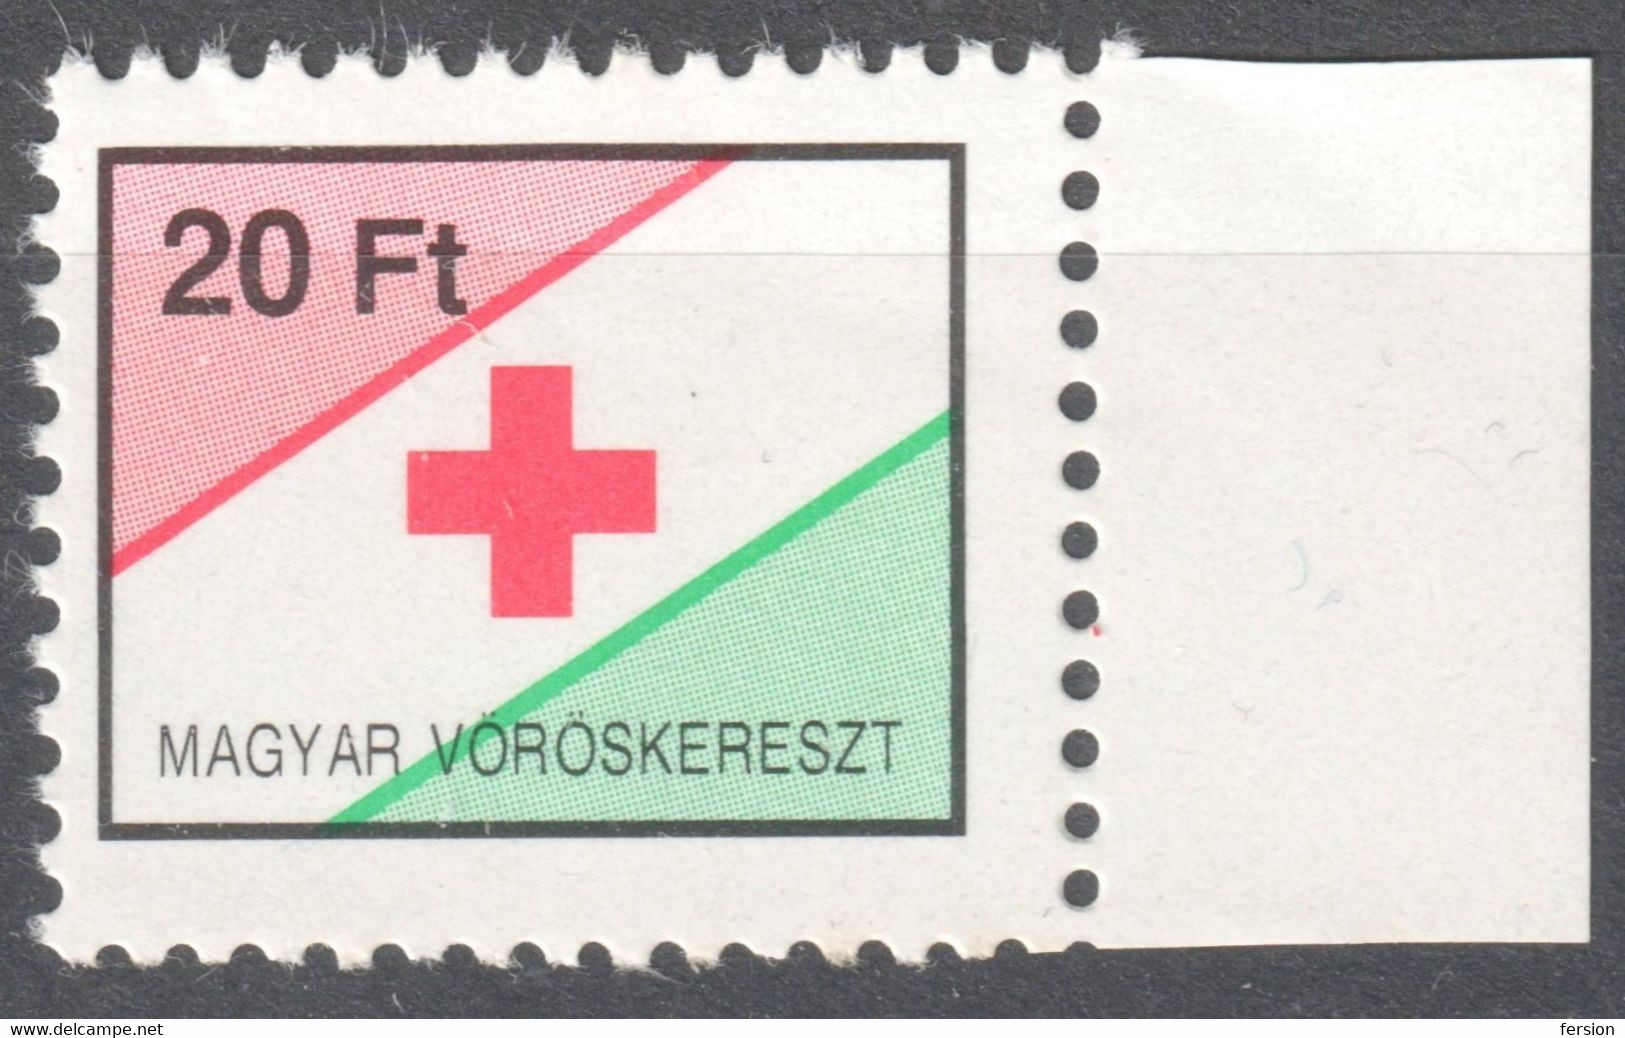 Official Red Cross Rotes Kreuz Croix Rouge Member Tax Stamp 20 Ft 1990 Hungary Ungarn Hongrie - Revenue Stamps